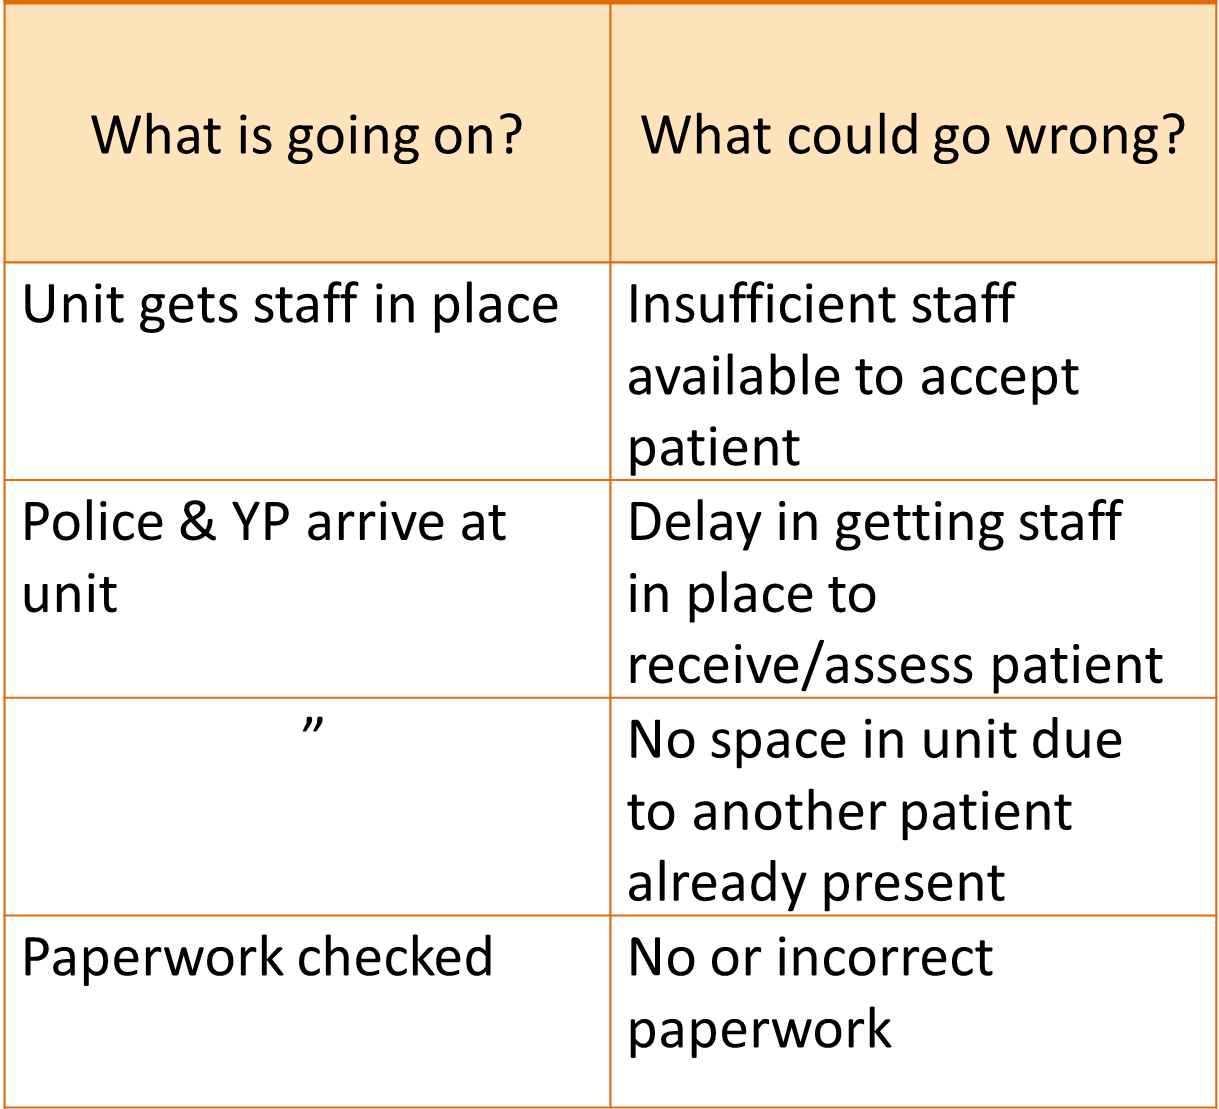 Portion of a risk table, showing the things that could go wrong at some of the steps in the process. The first step is: Unit gets staff in place. This could go wrong by insufficient staff being available to accept patient. The next step is: Police and Young Person arrive at unit. This could go wrong by a Delay in getting staff in place, or No space in unit due to another patient already present. Another step is: Paperwork checked. This could go wrong by No or incorrect paperwork being available.